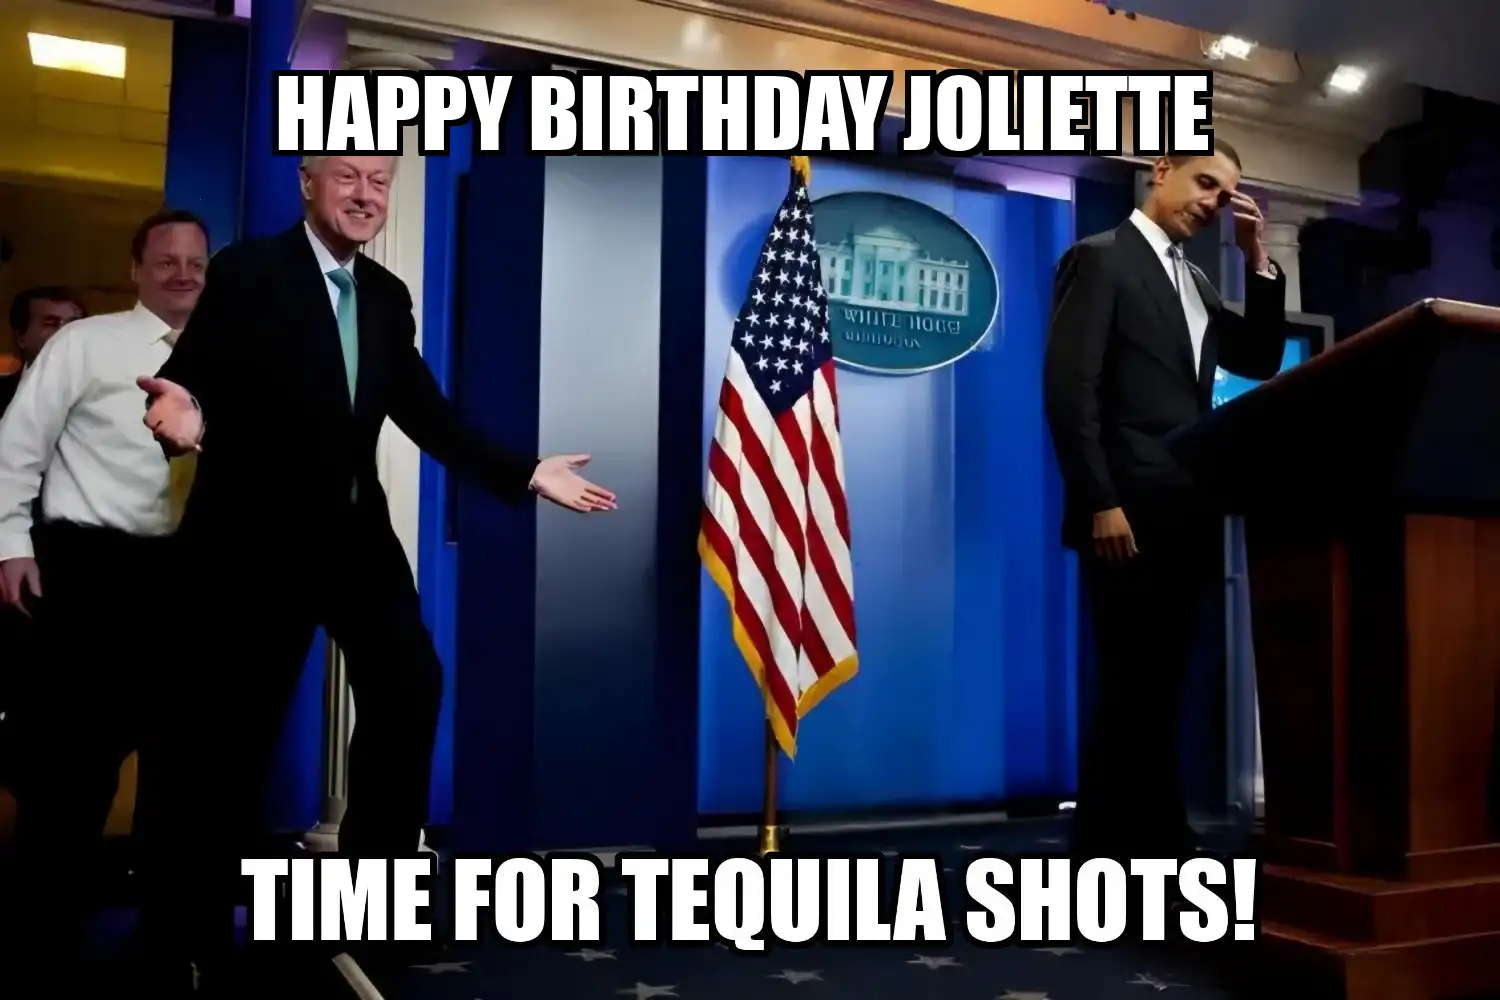 Happy Birthday Joliette Time For Tequila Shots Memes